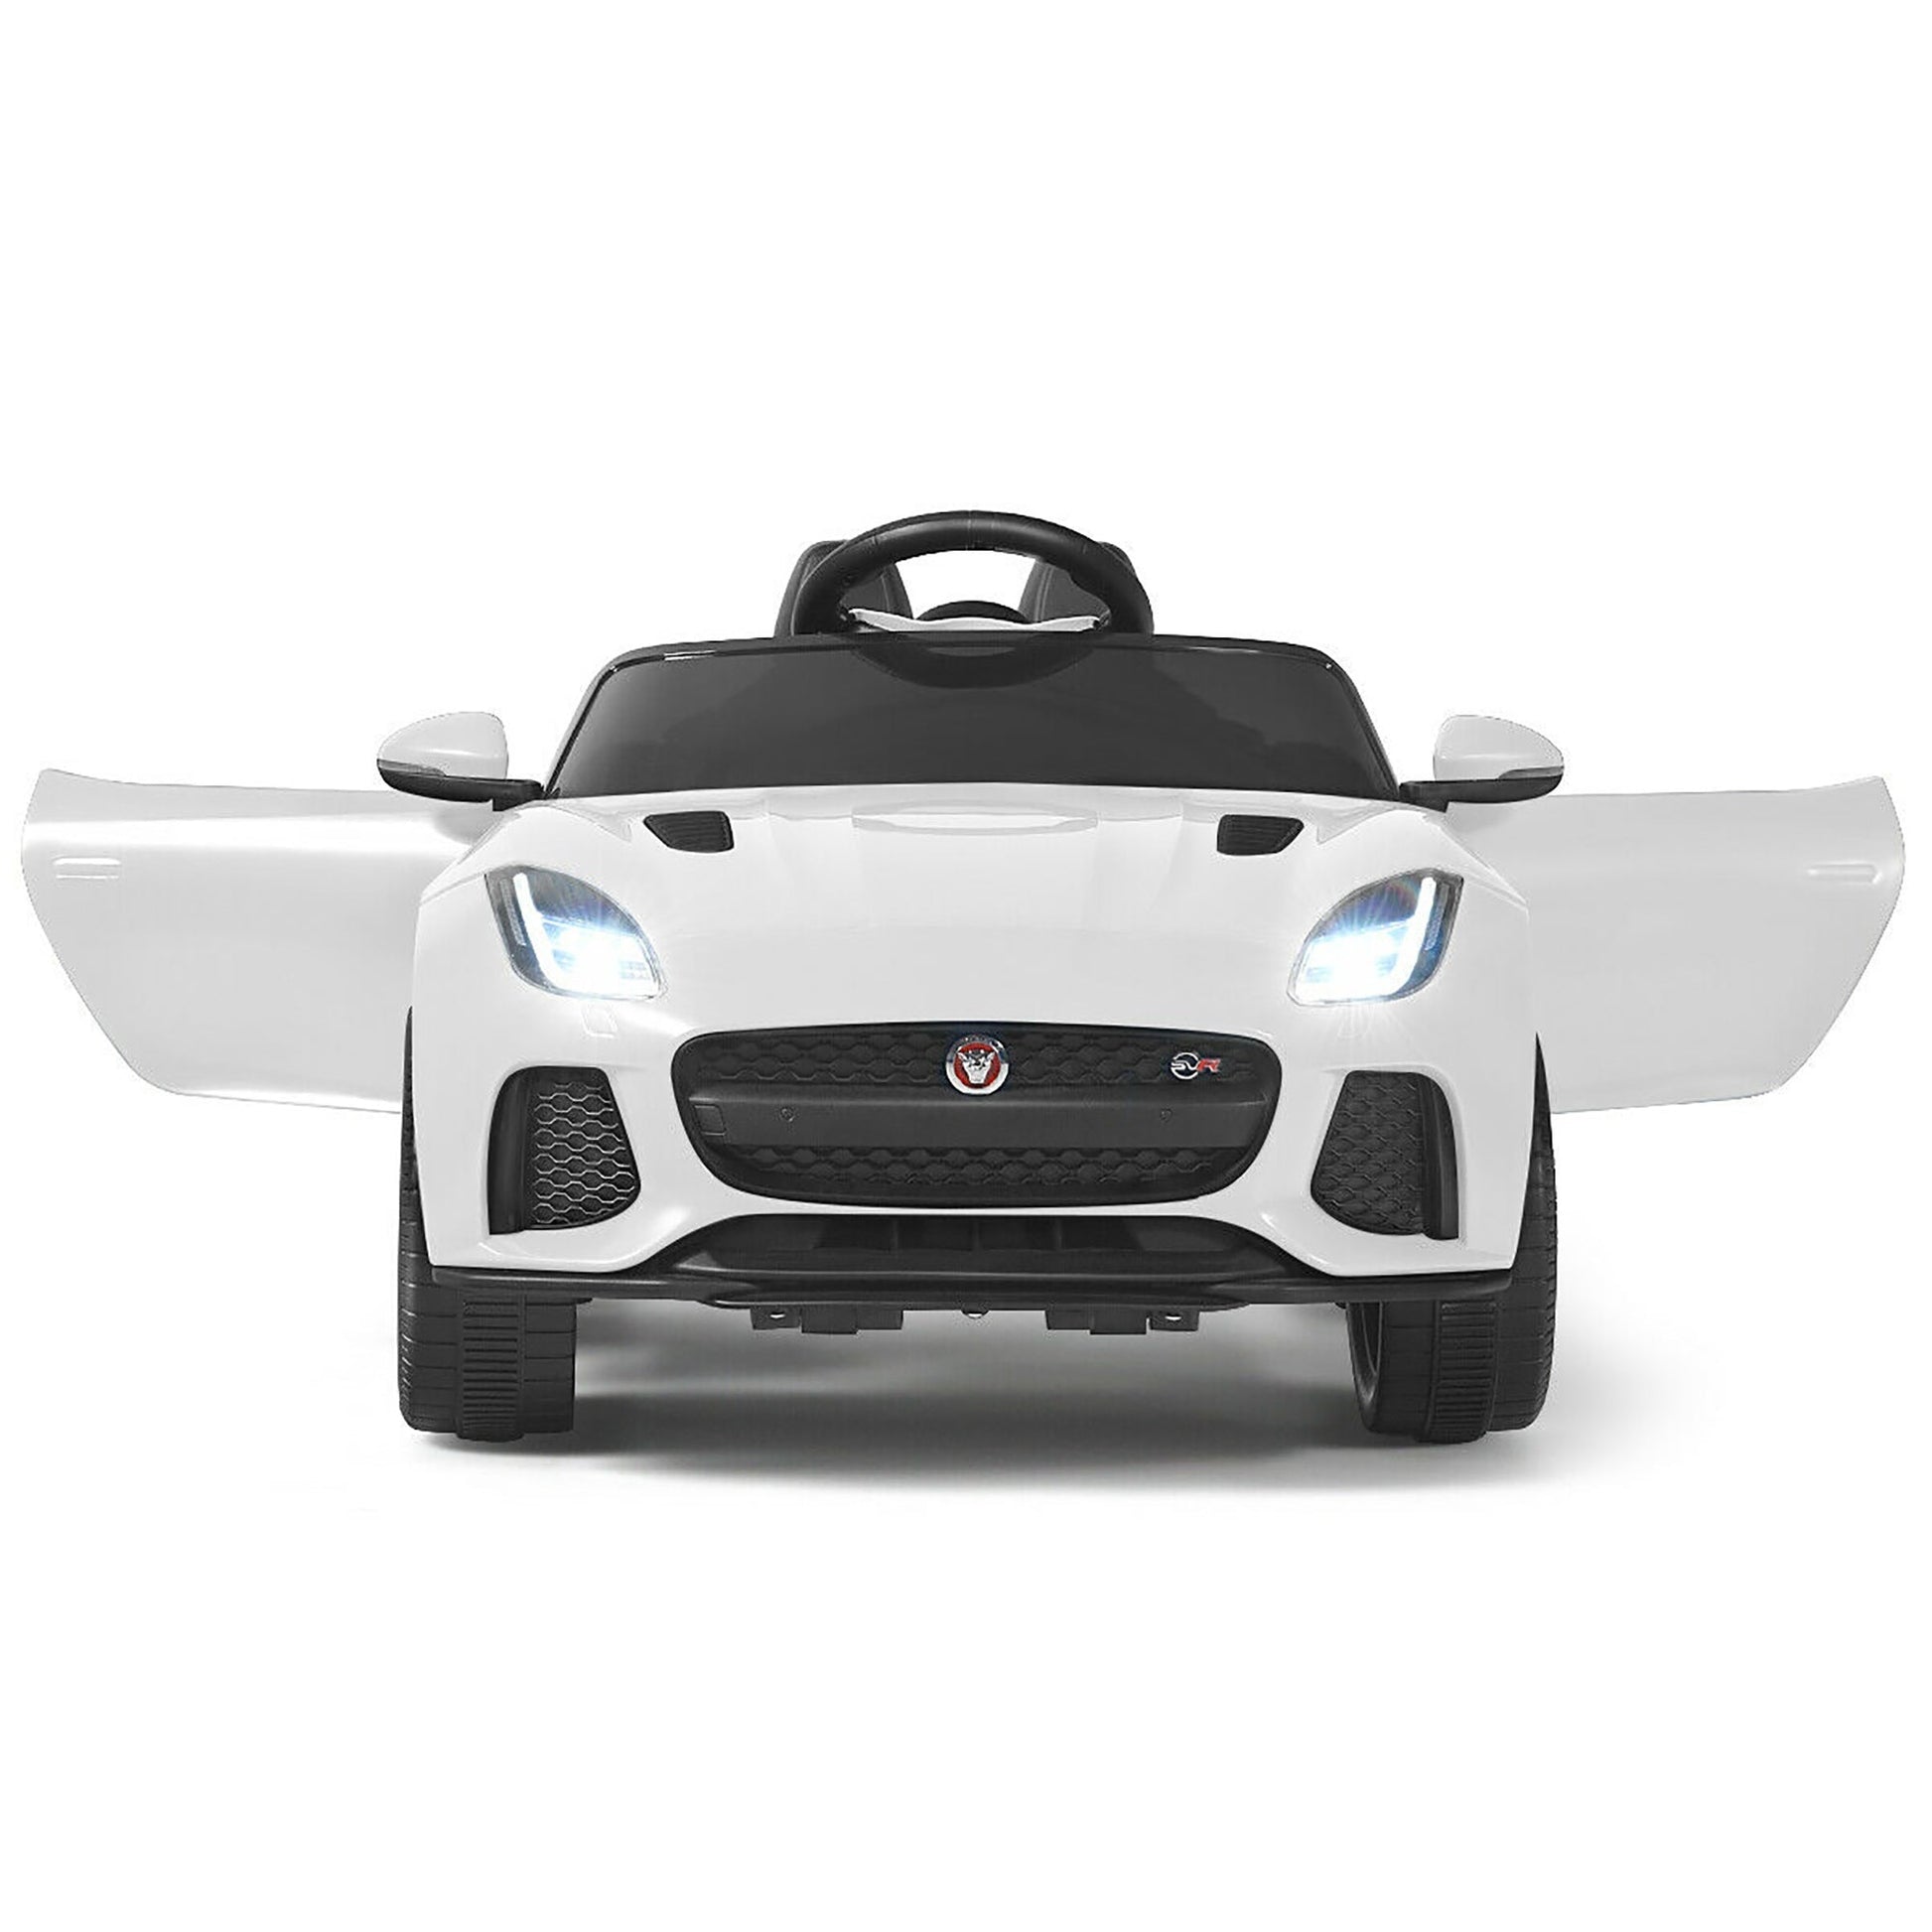 "White JAGUAR F-Type electric ride-on car for kids with parental remote and MP3 player input."